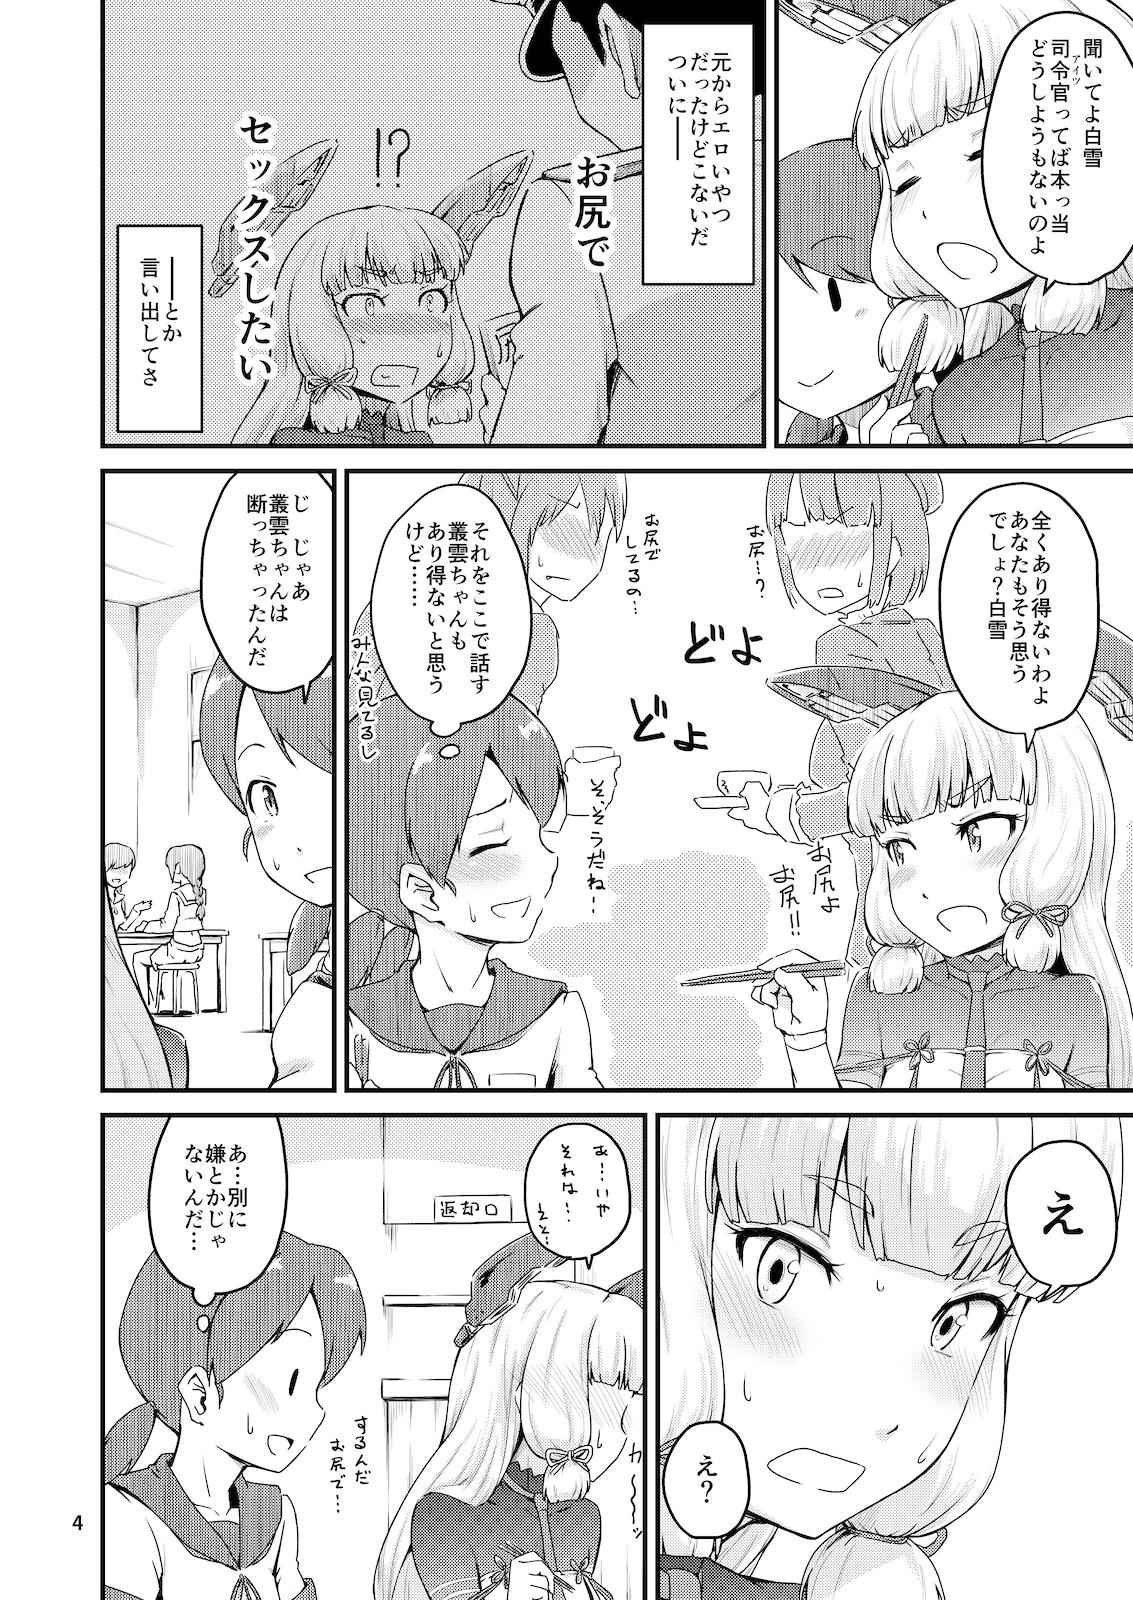 Trap Musshu Murakumo!! - Kantai collection Best Blowjob Ever - Page 3